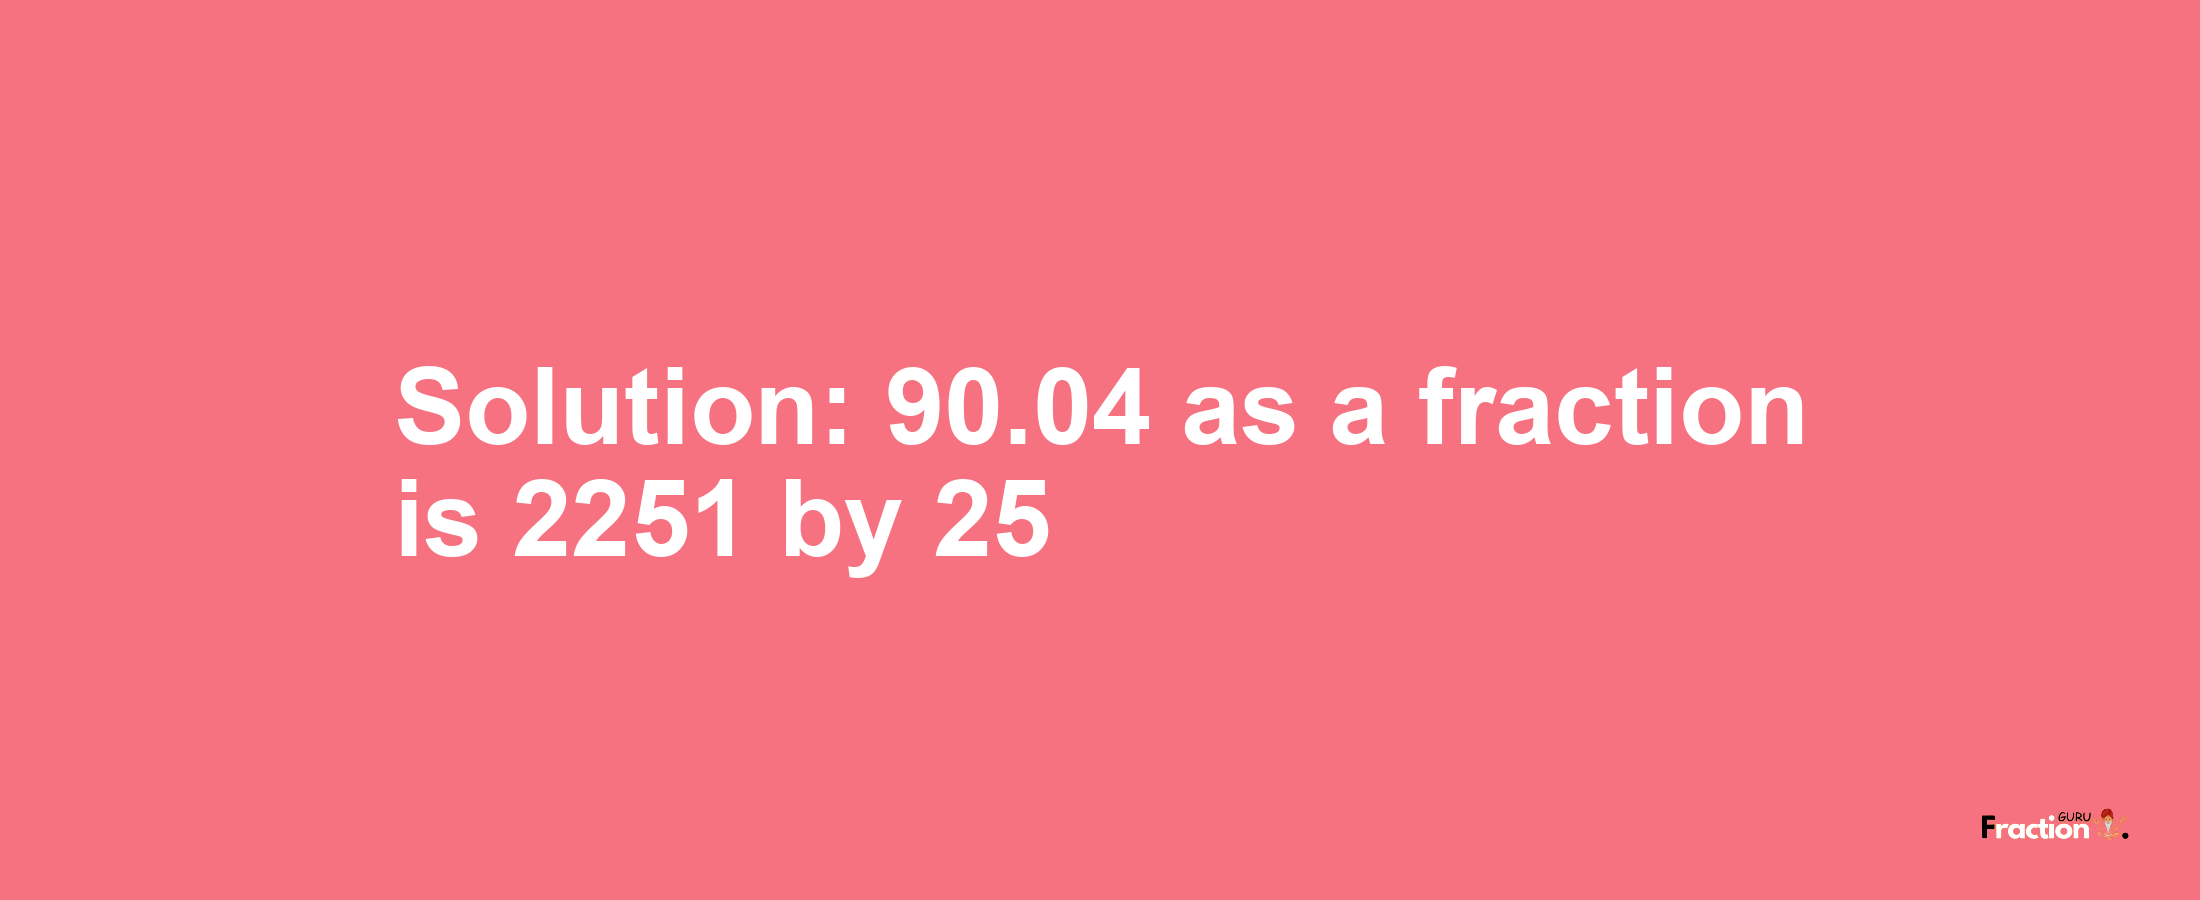 Solution:90.04 as a fraction is 2251/25